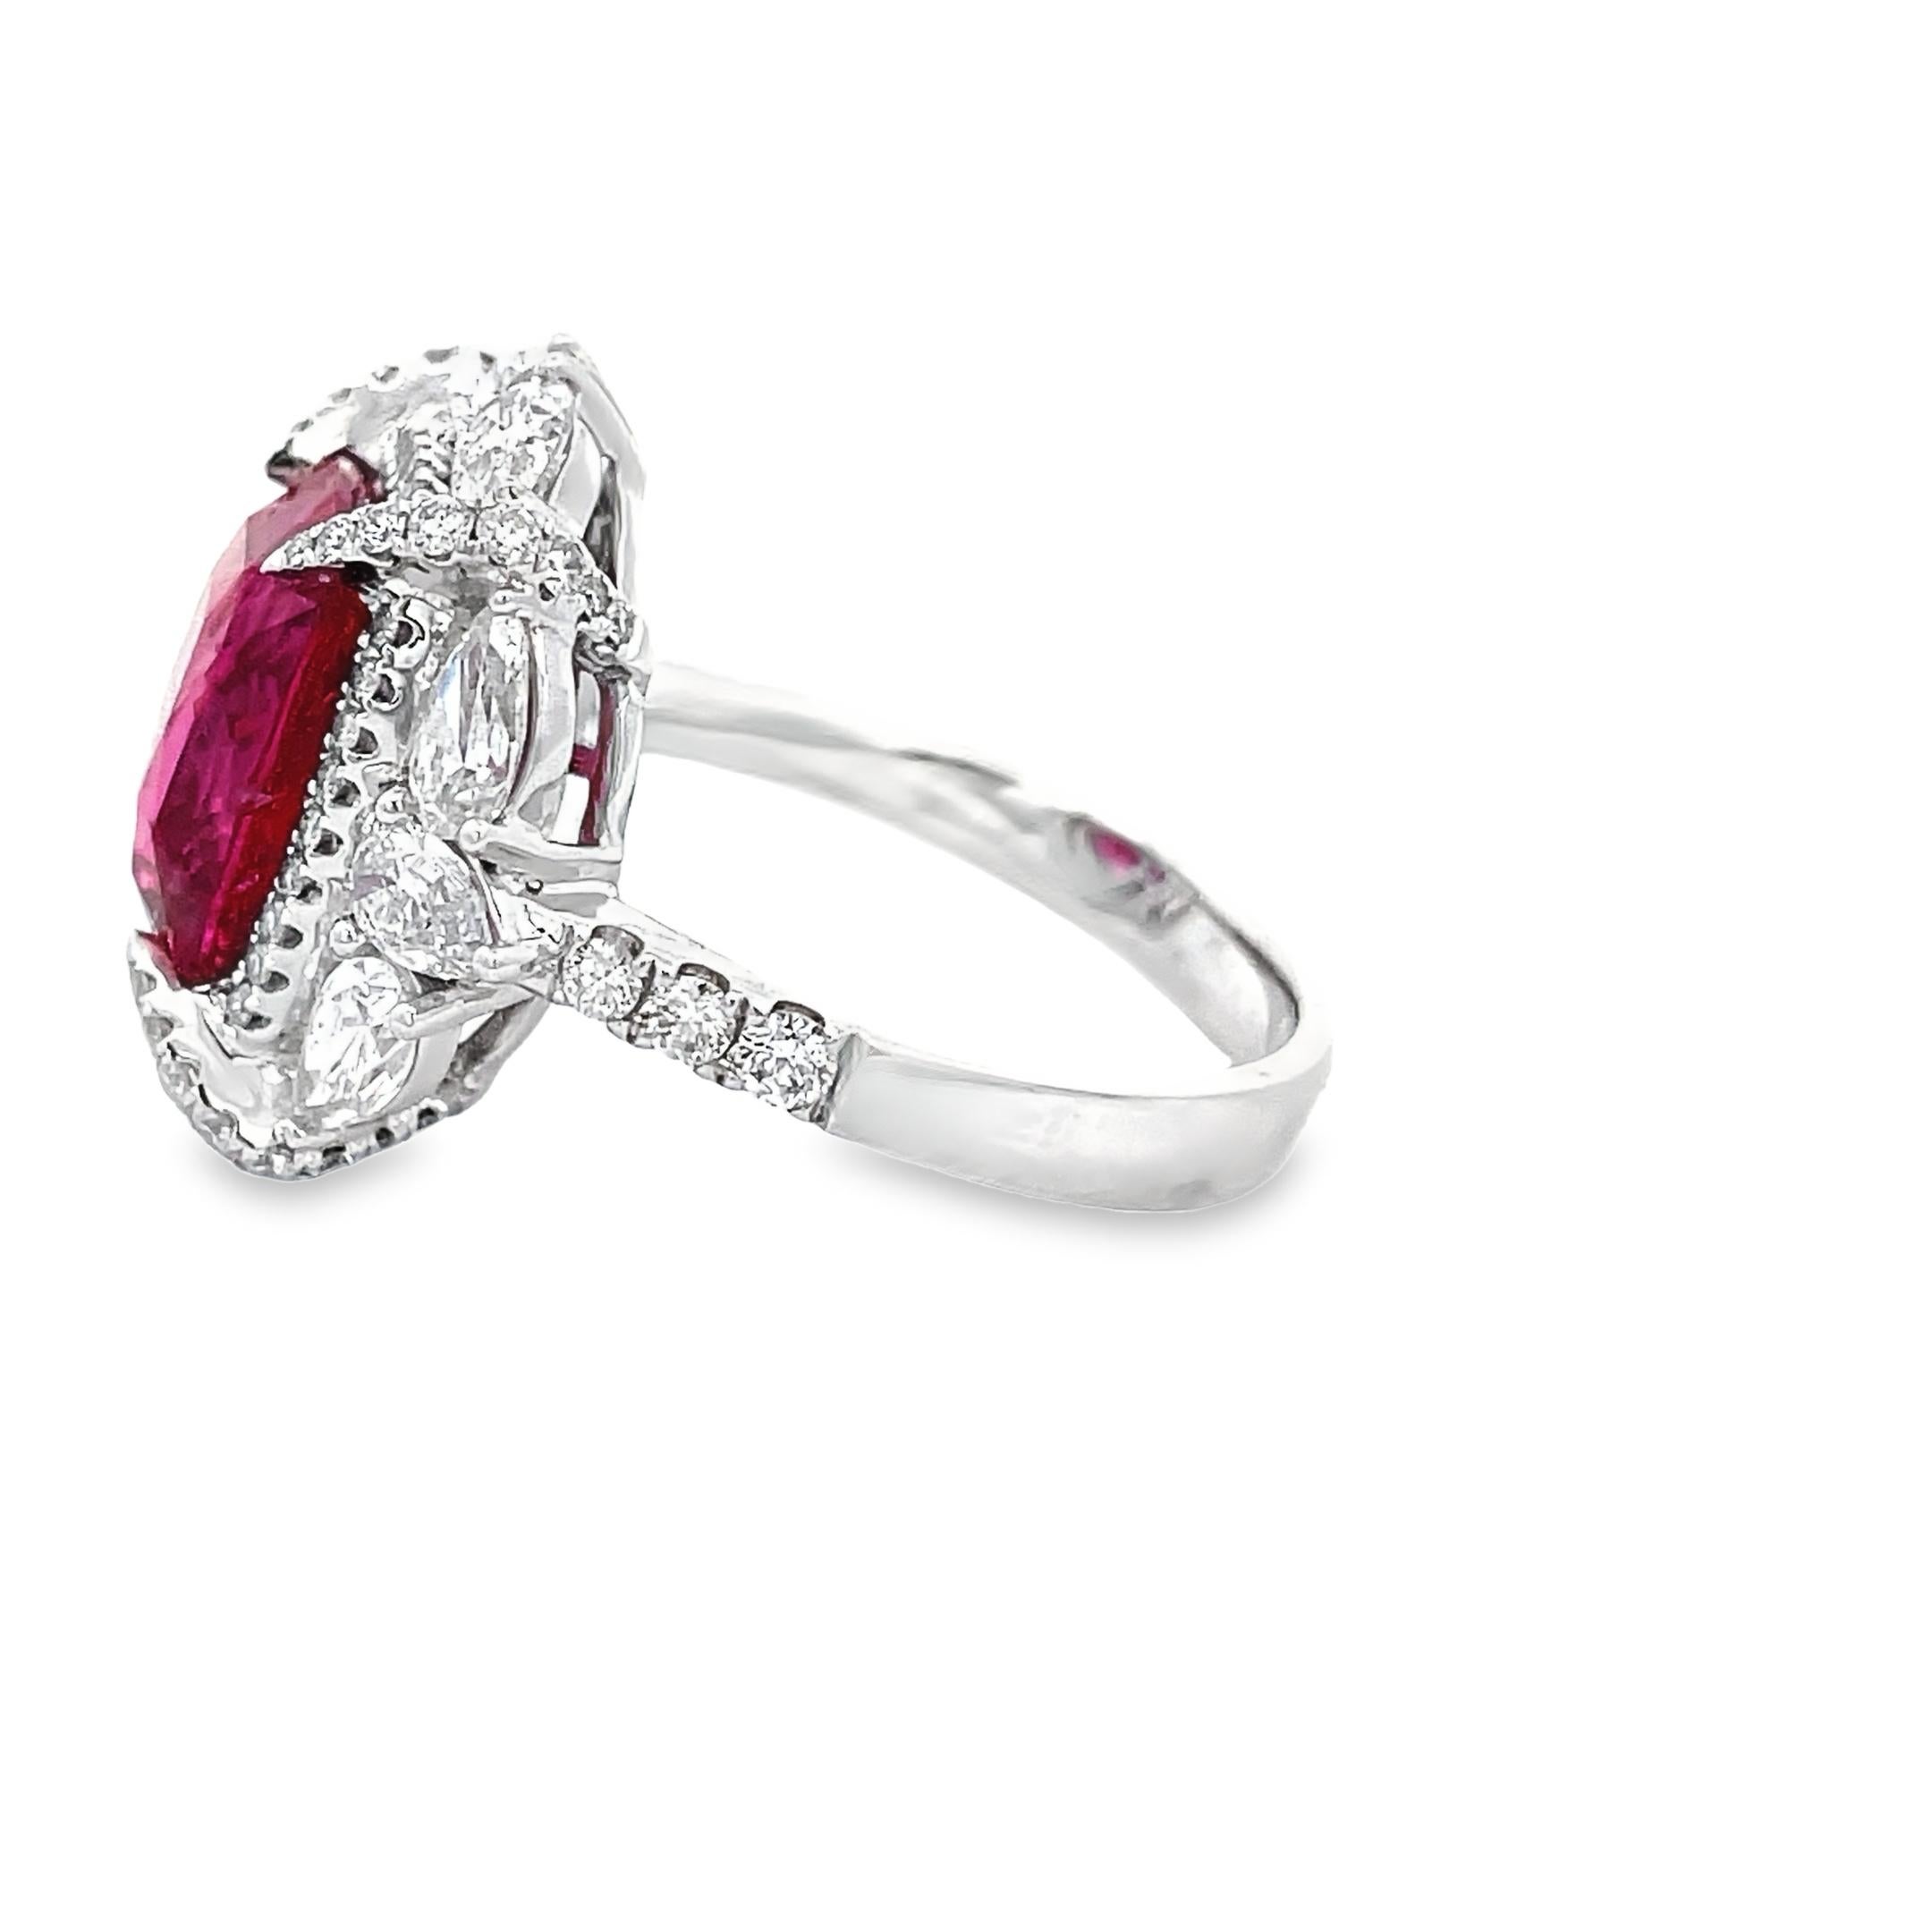 Cushion Cut AGL Certified PINK SAPPHIRE CUS 6.07 CT. WHITE DIA (MIX SHAPE) 2.23CT 18KW RING For Sale